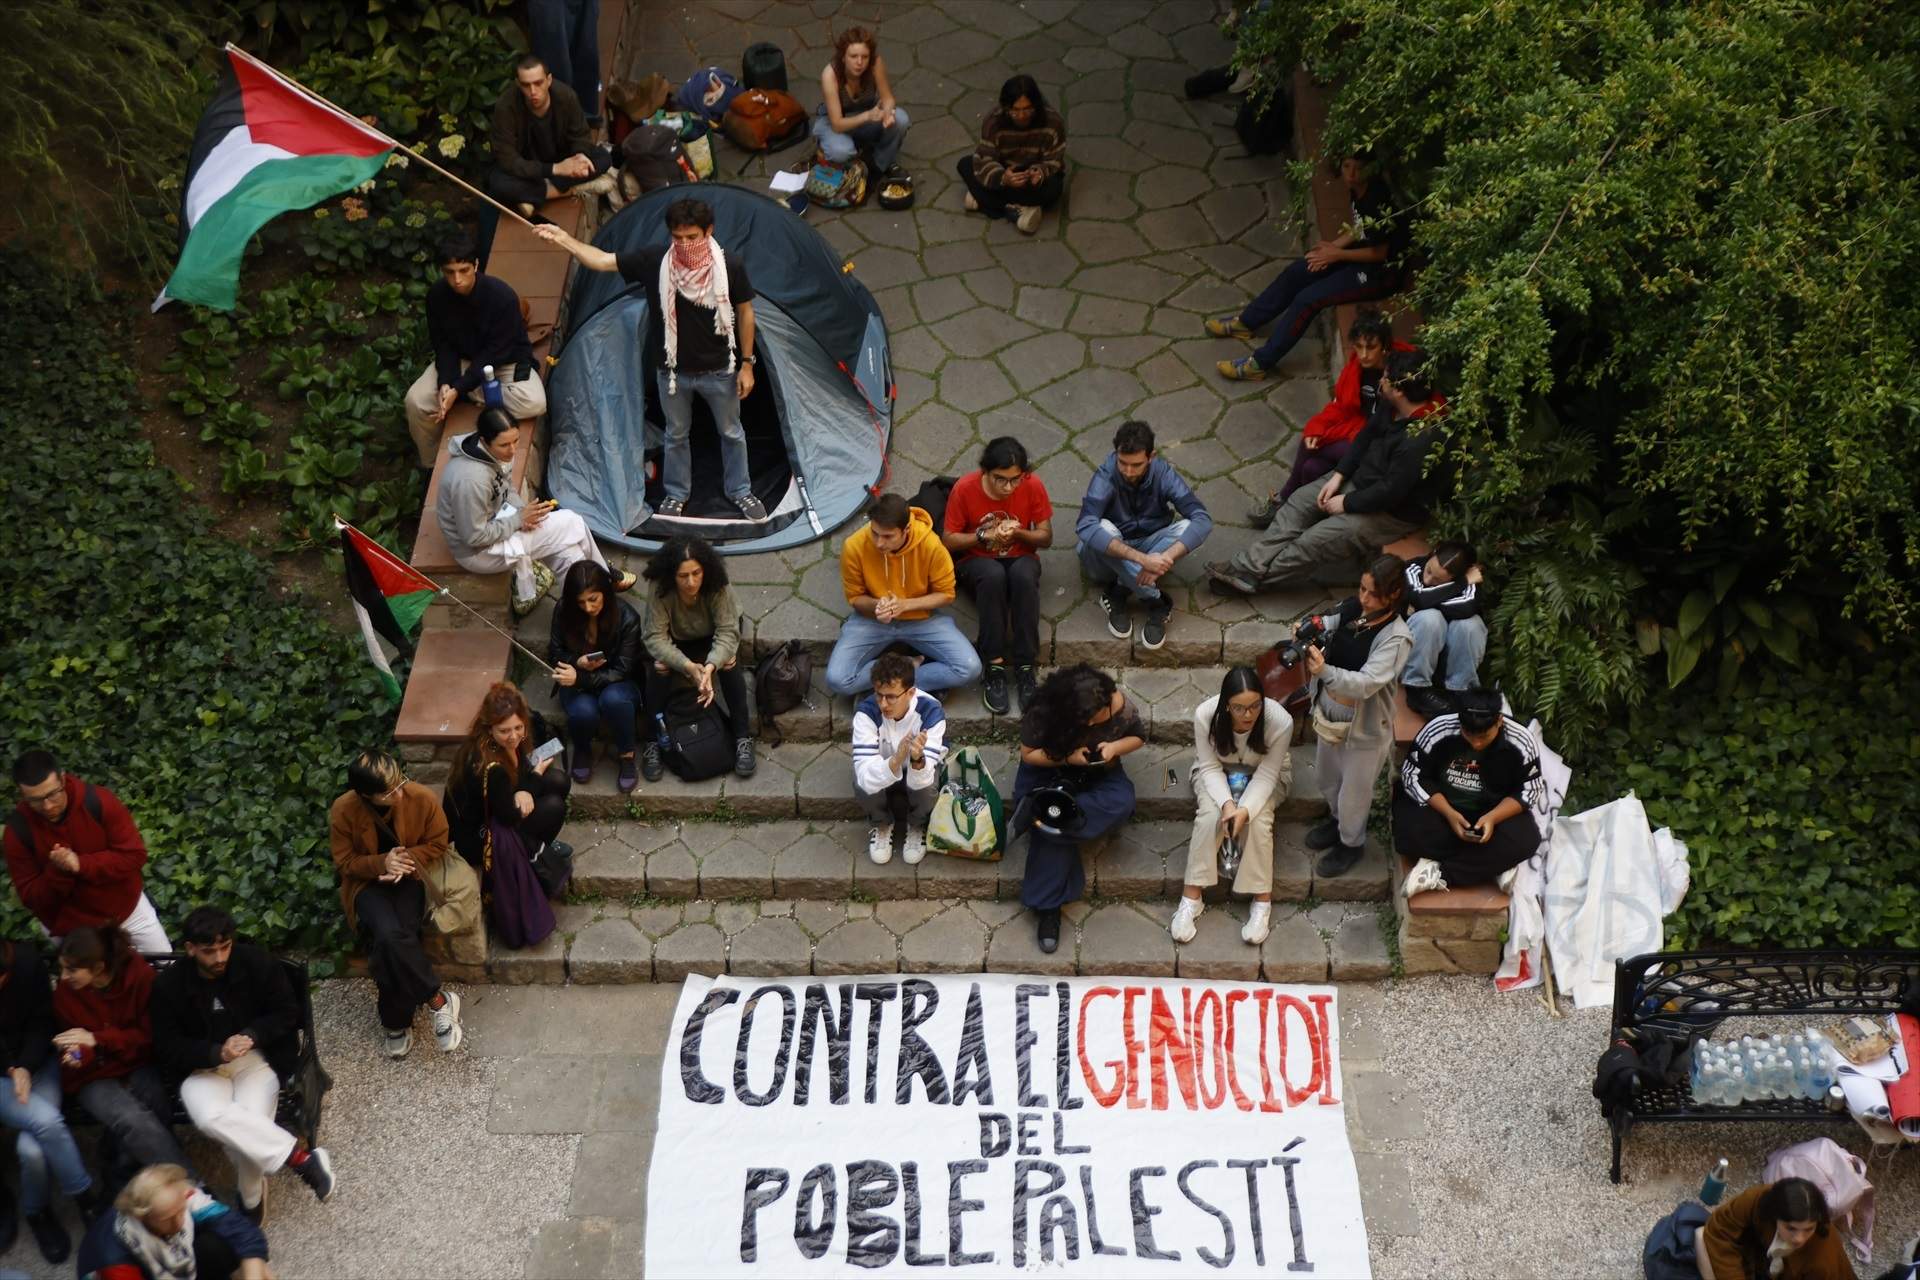 University of Barcelona faculty passes motion calling to break academic relations with Israel